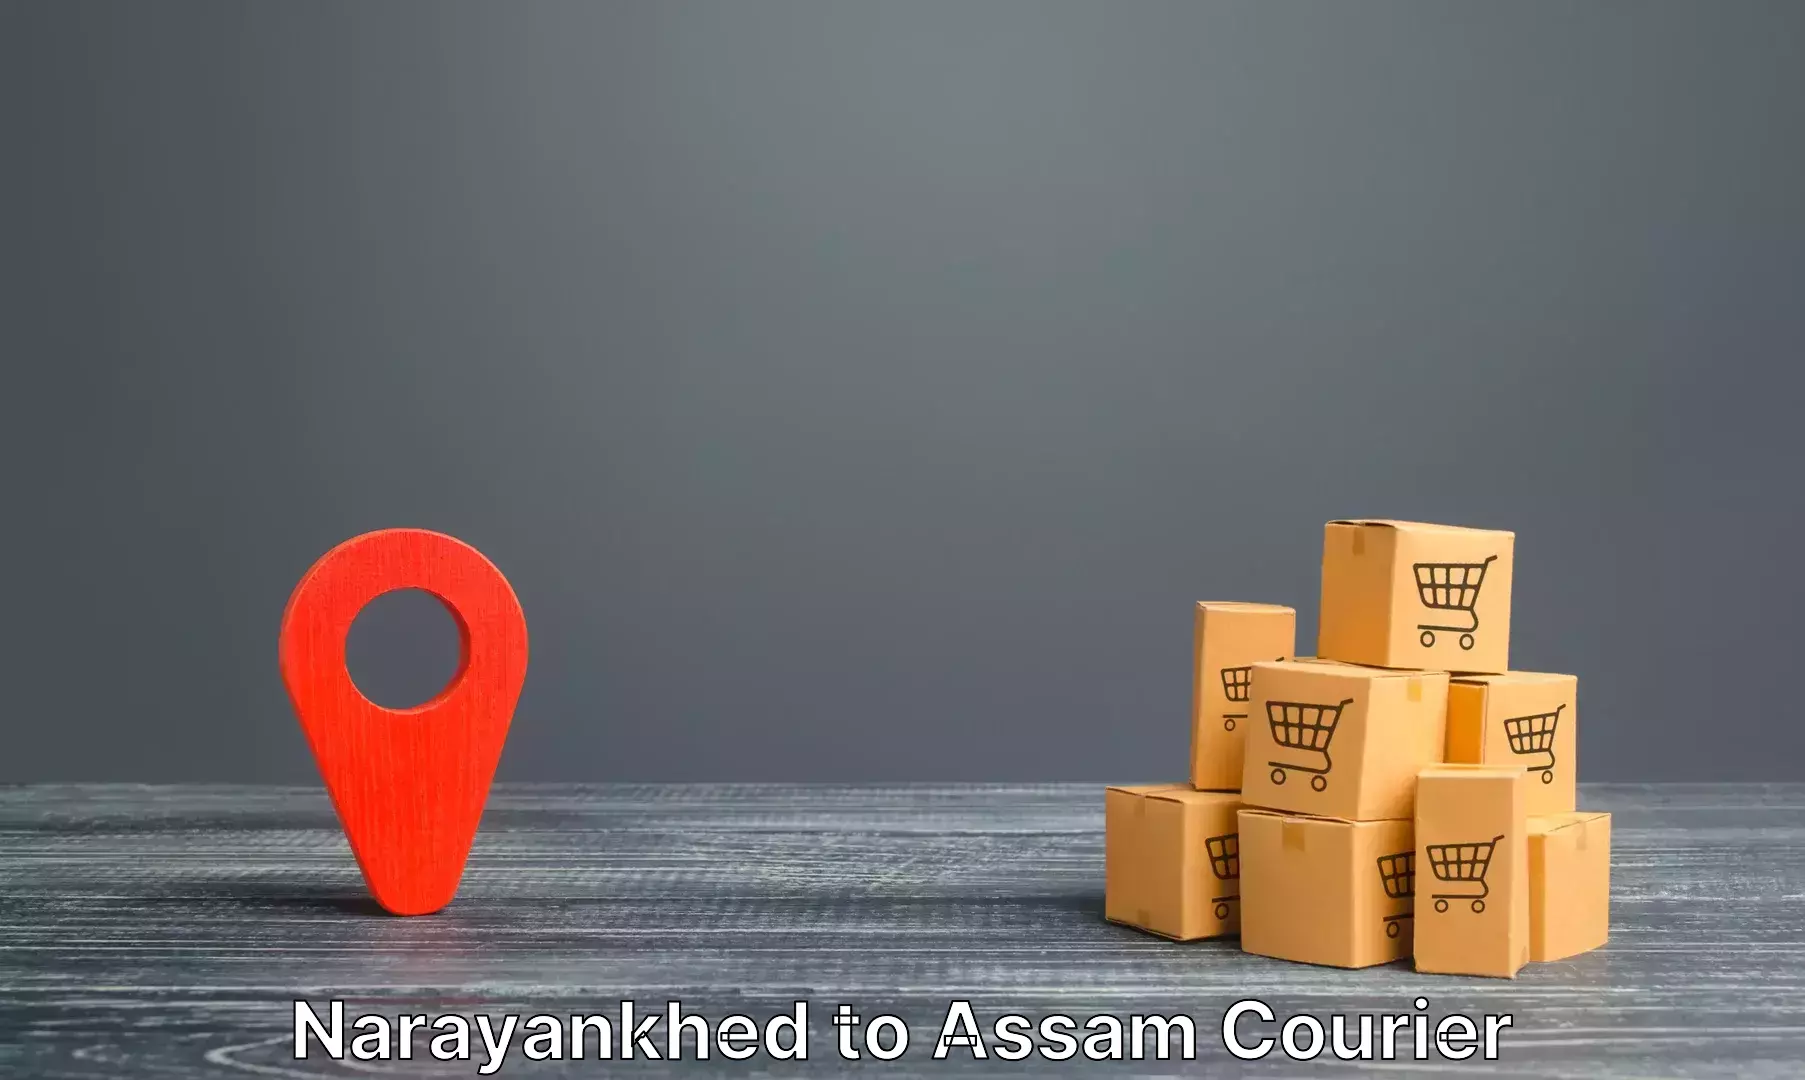 Luggage shipping specialists Narayankhed to Assam